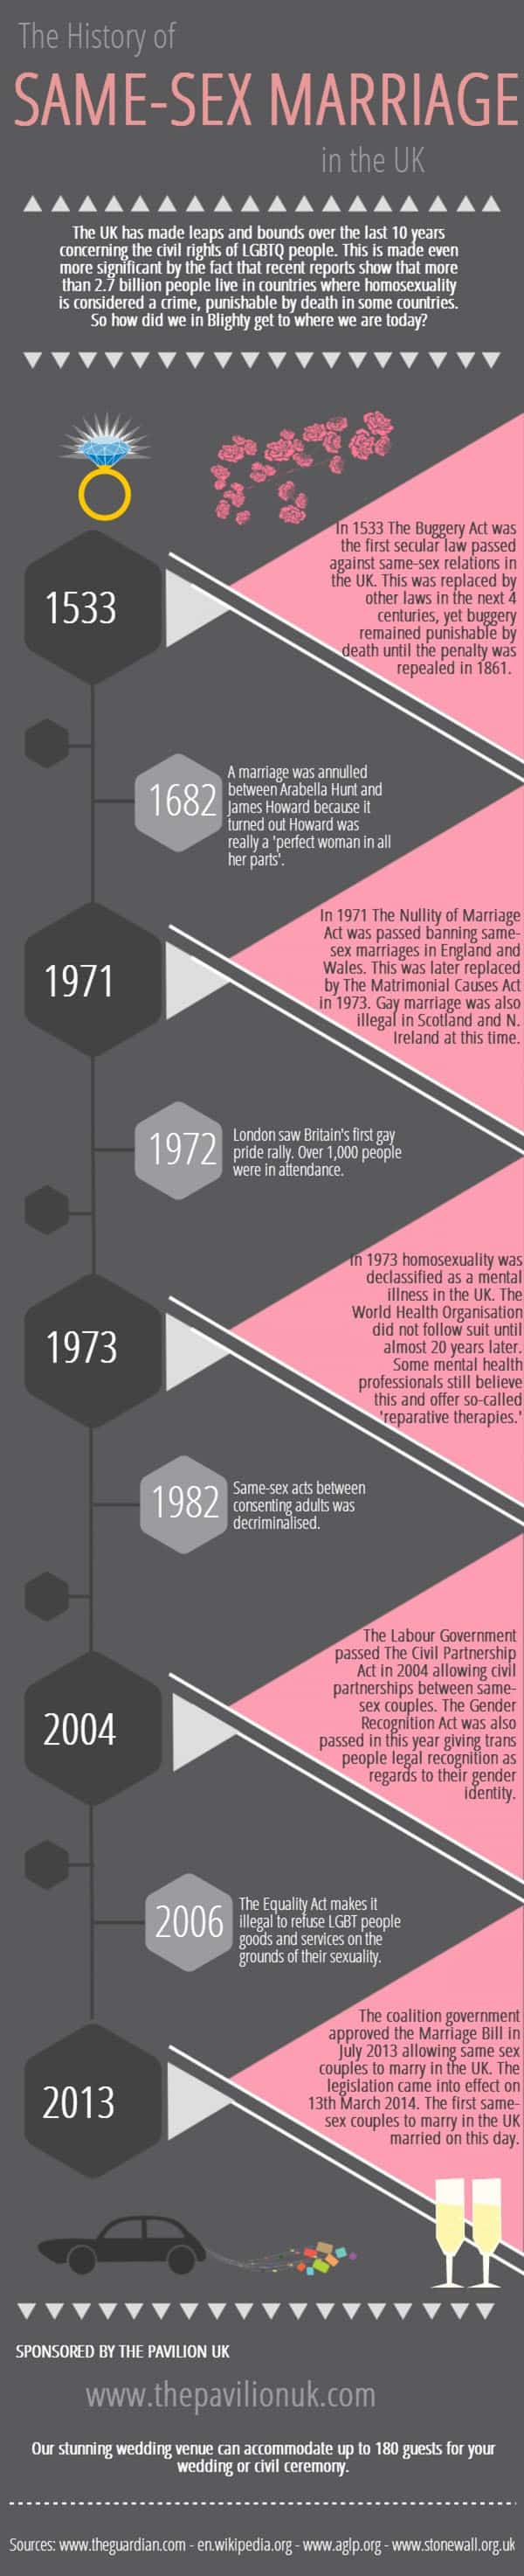 History of Same-Sex Marriage Infographic